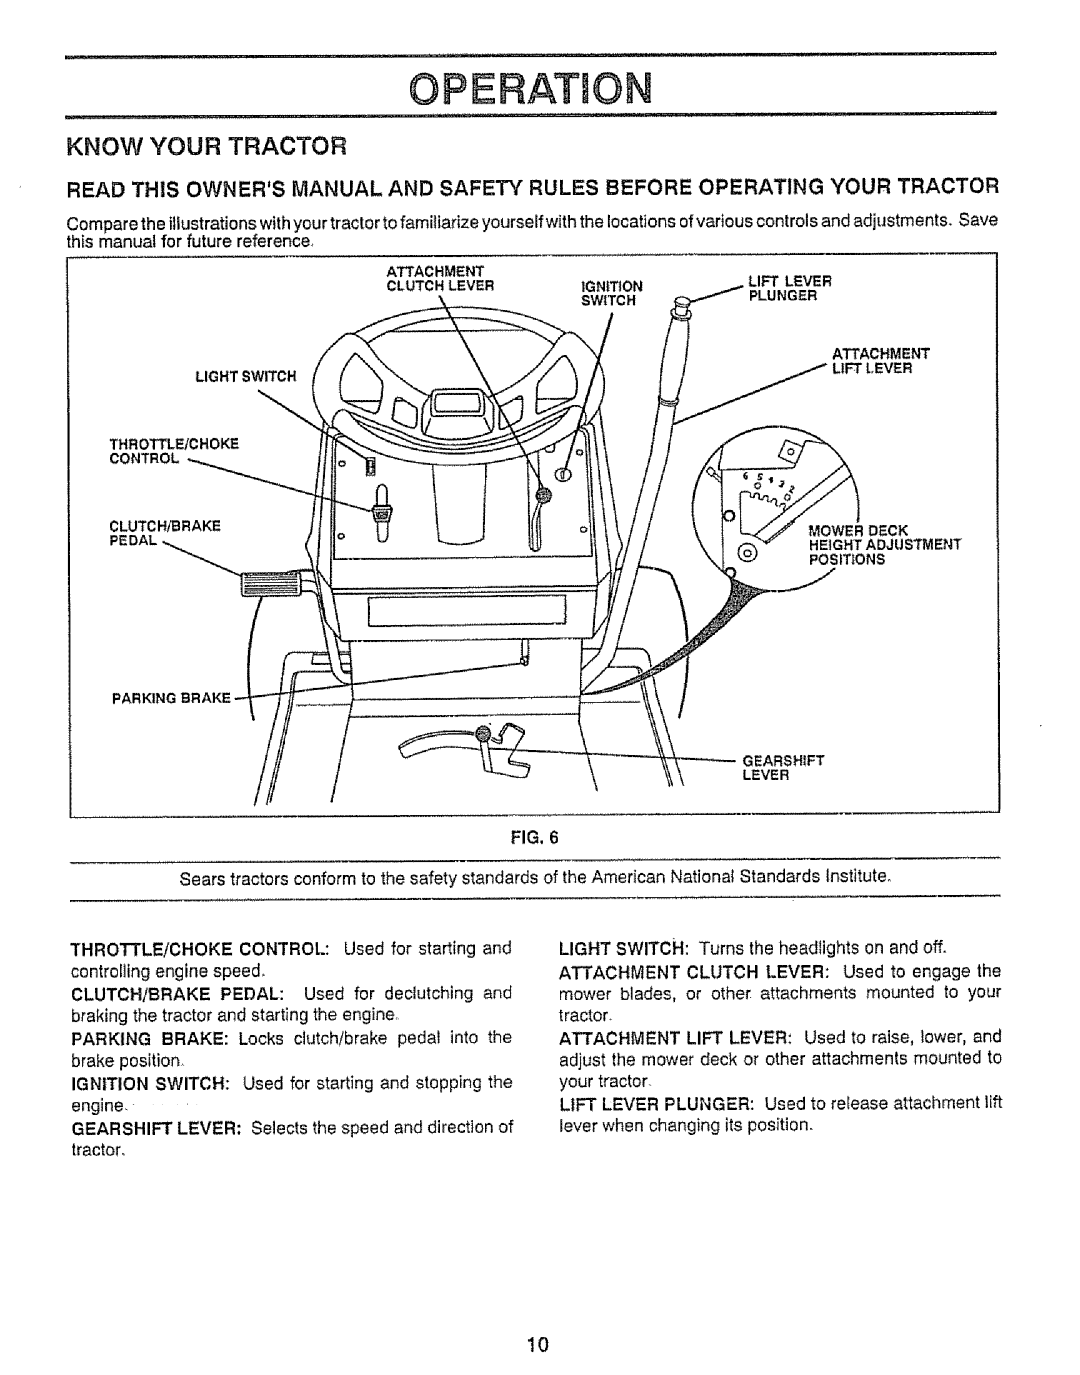 Craftsman 917.255561 owner manual Operation, Know Your Tractor, Throttle/Choke Control, Fig 